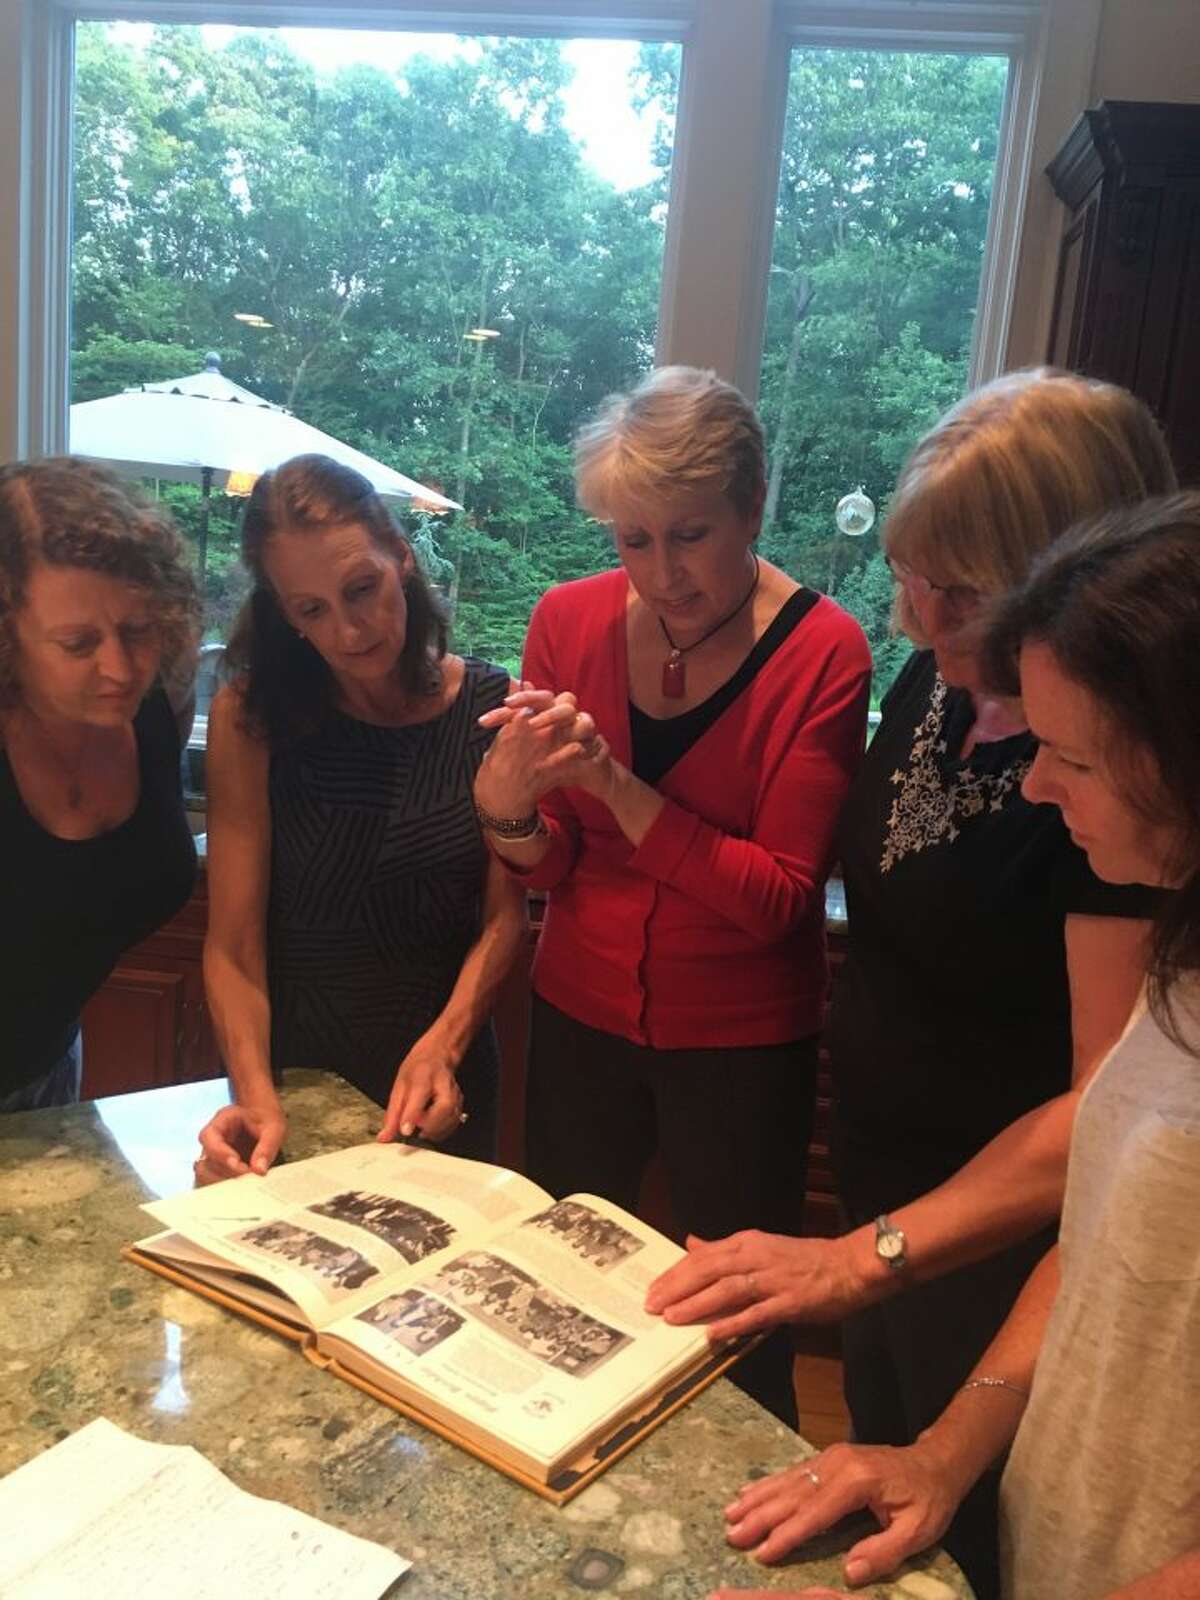 Members of the Class of 1976 gather around the yearbook, reminiscing on the different school clubs, trendy hangouts and music from the 1970s. — Steve Coulter photo